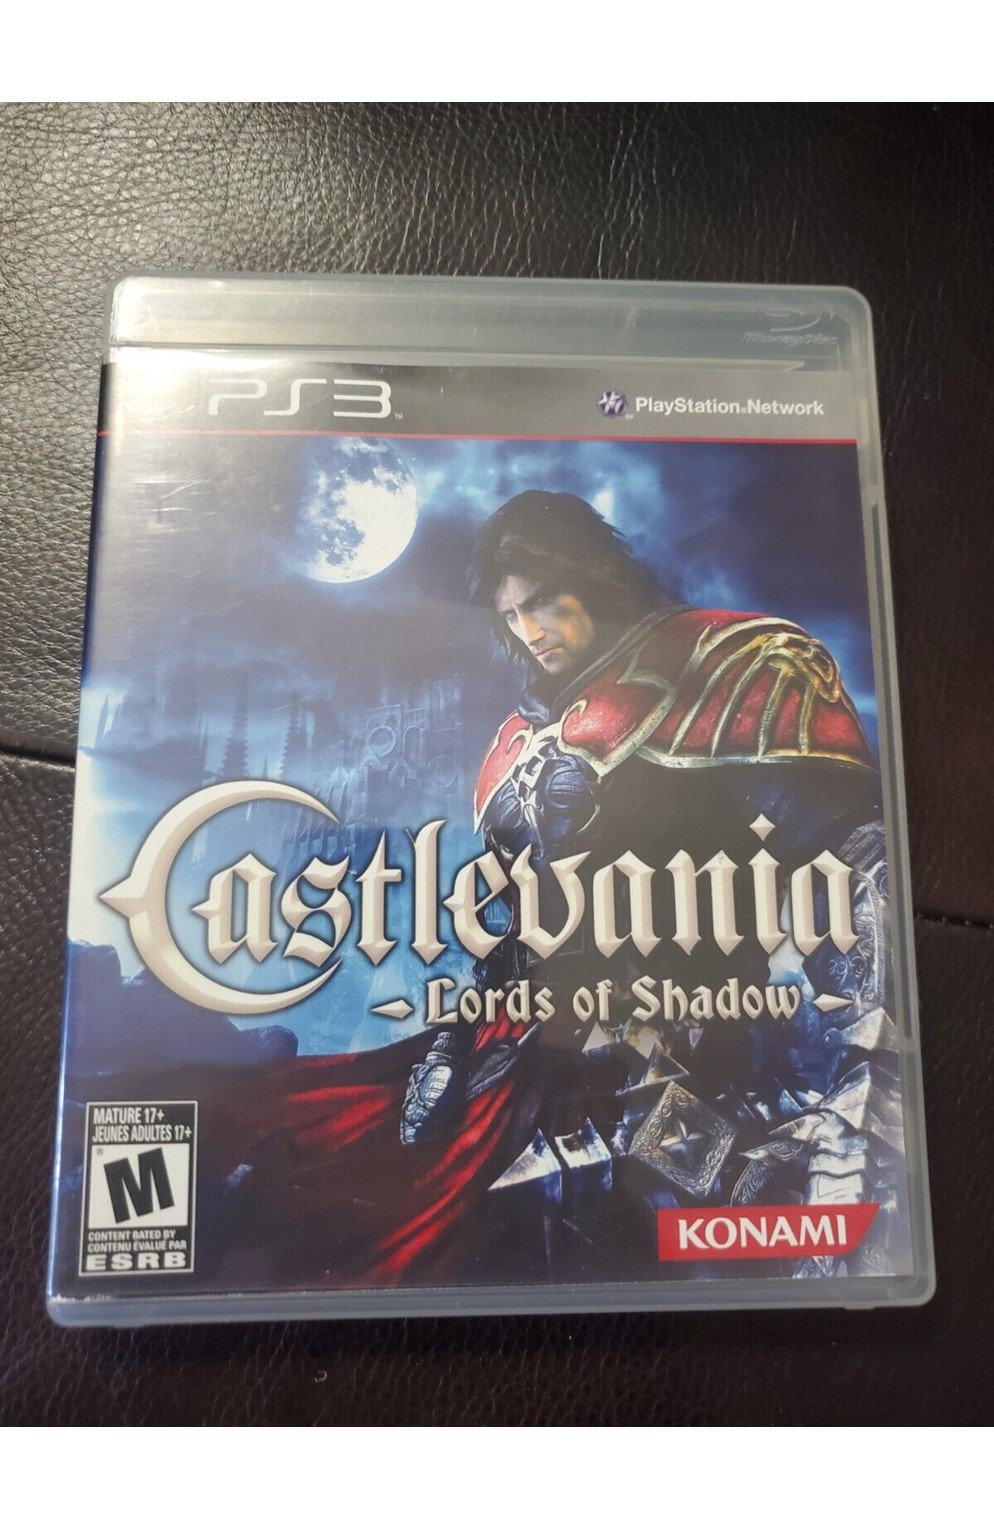 Playstation 3 Ps3 Castlevania Lords of Shadow